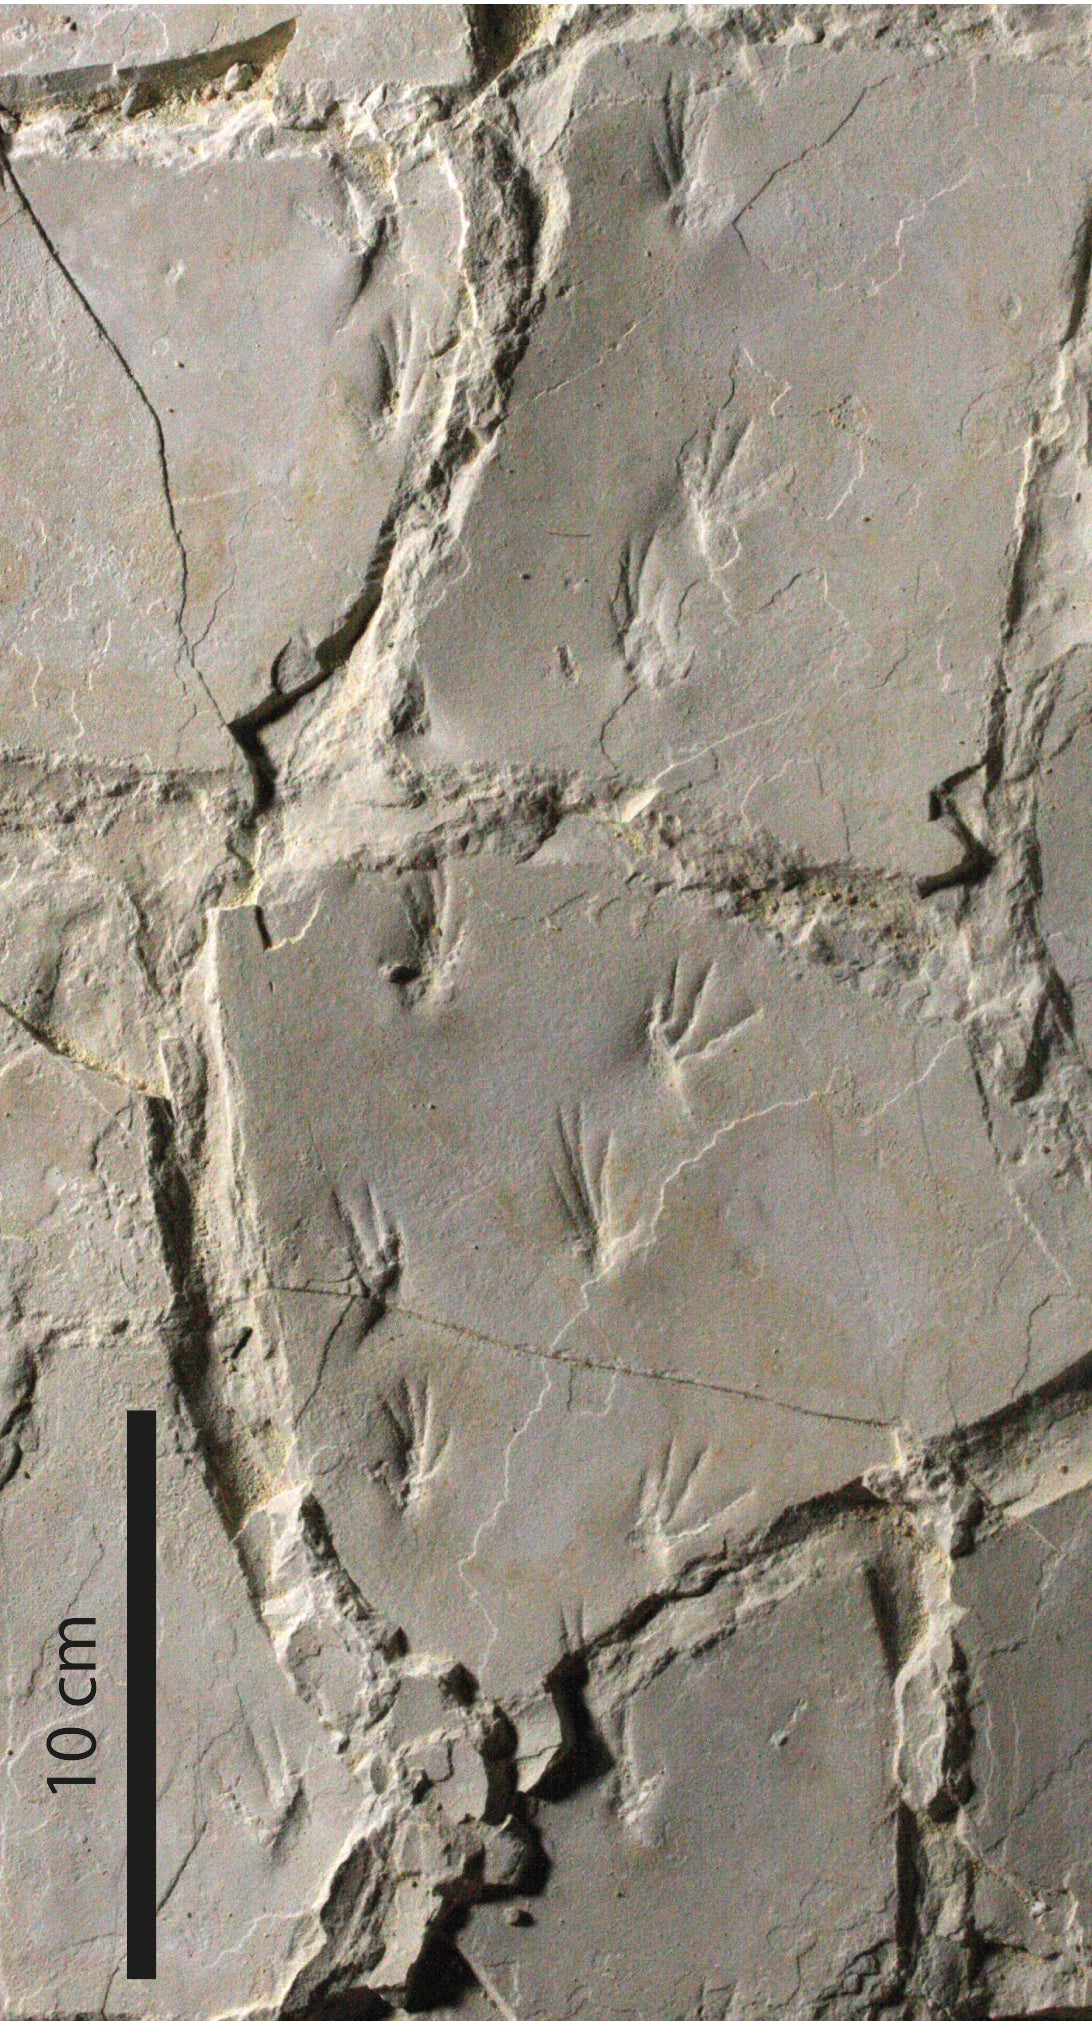 Footprint Find Could Be a “Holy Grail” of Pterosaur Research